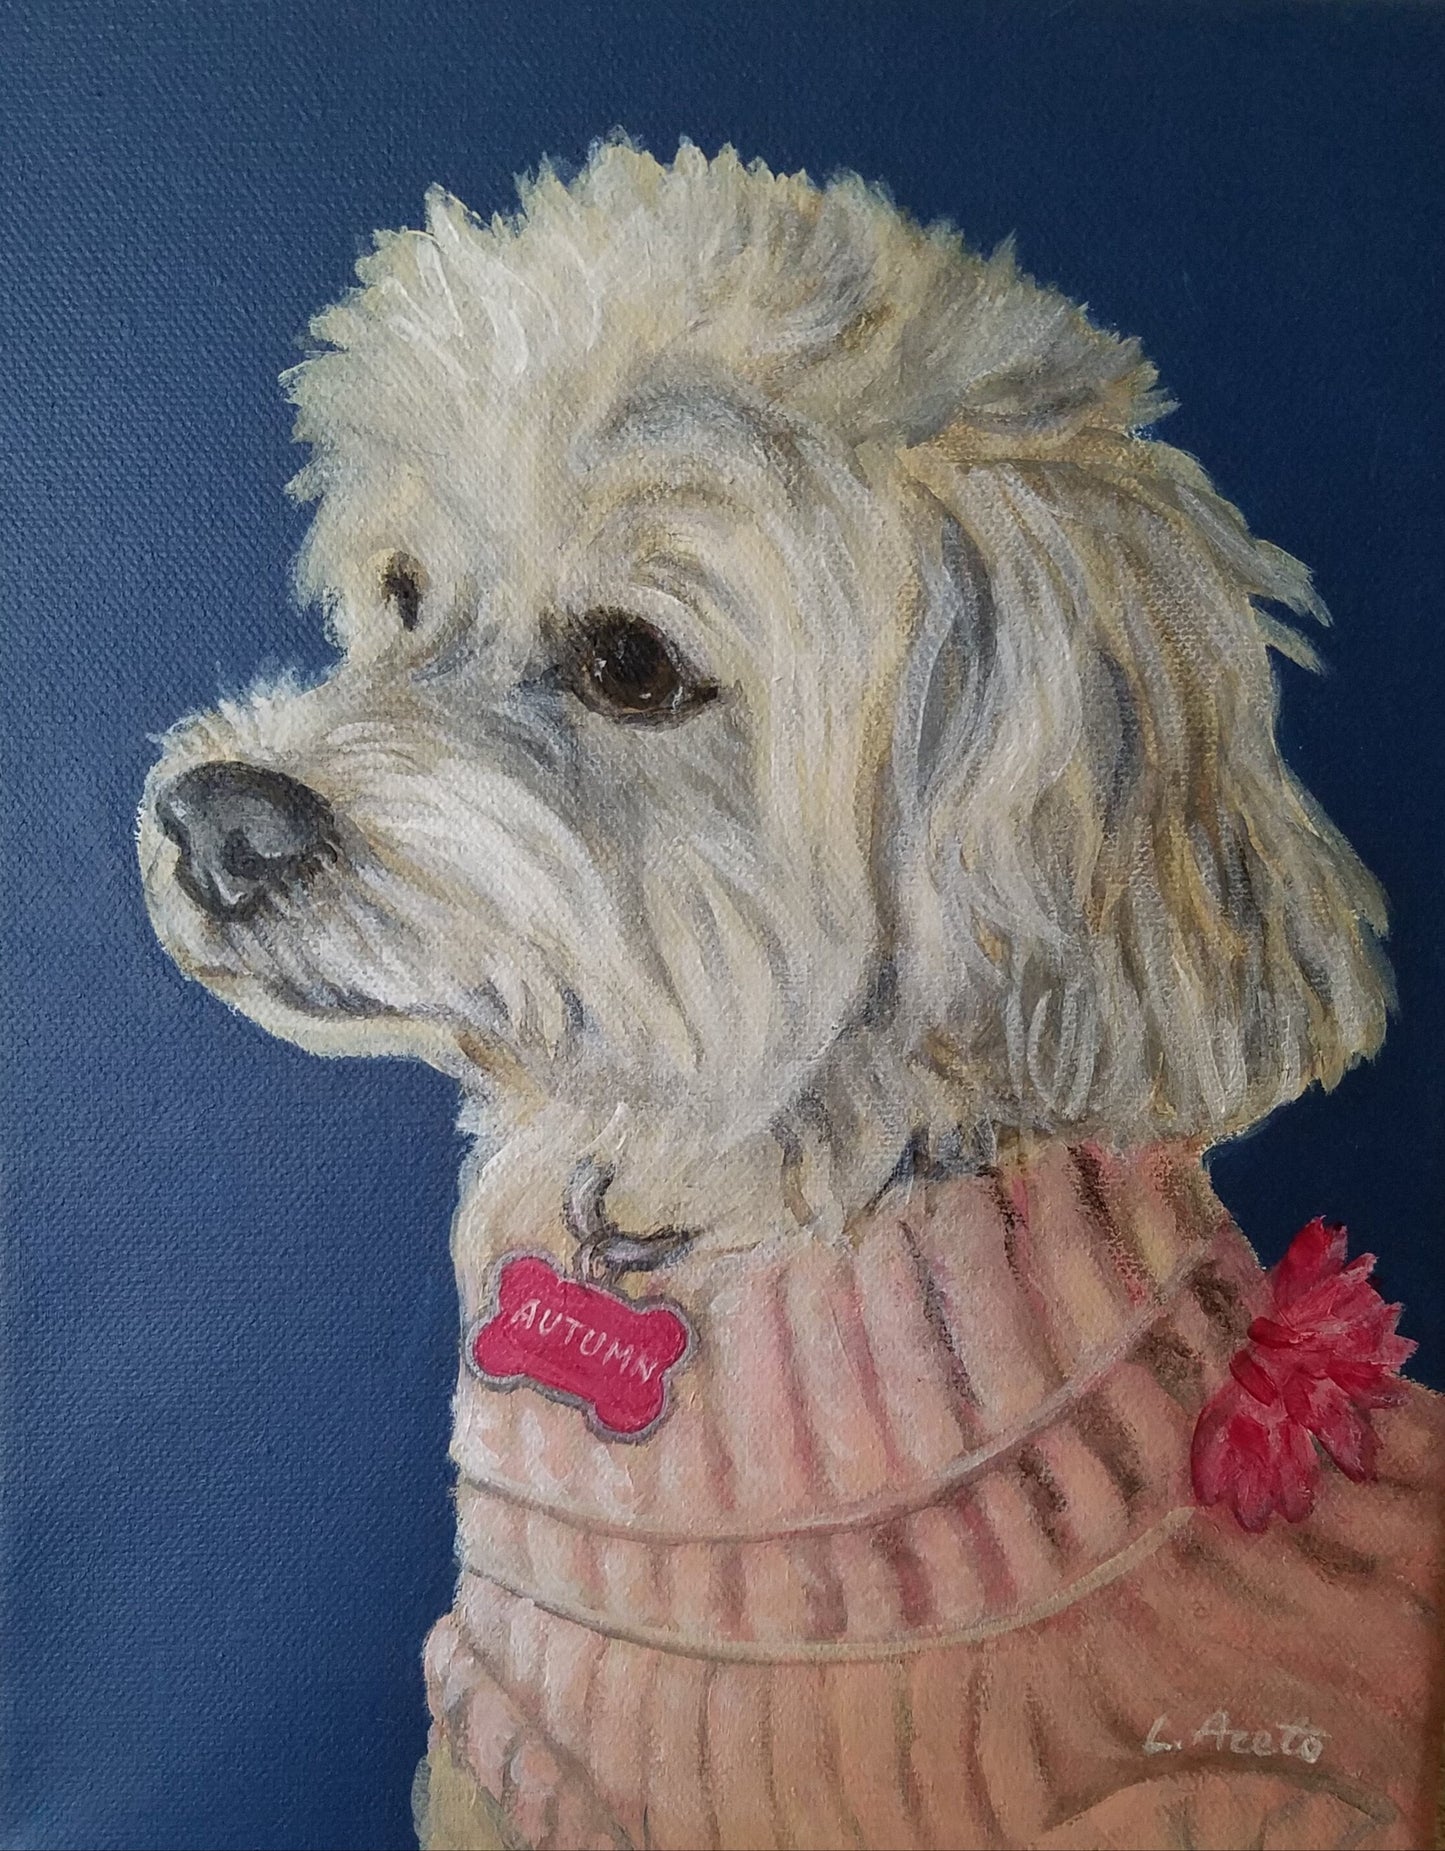 Dog Portrait Hand Painted from Photo, acrylic